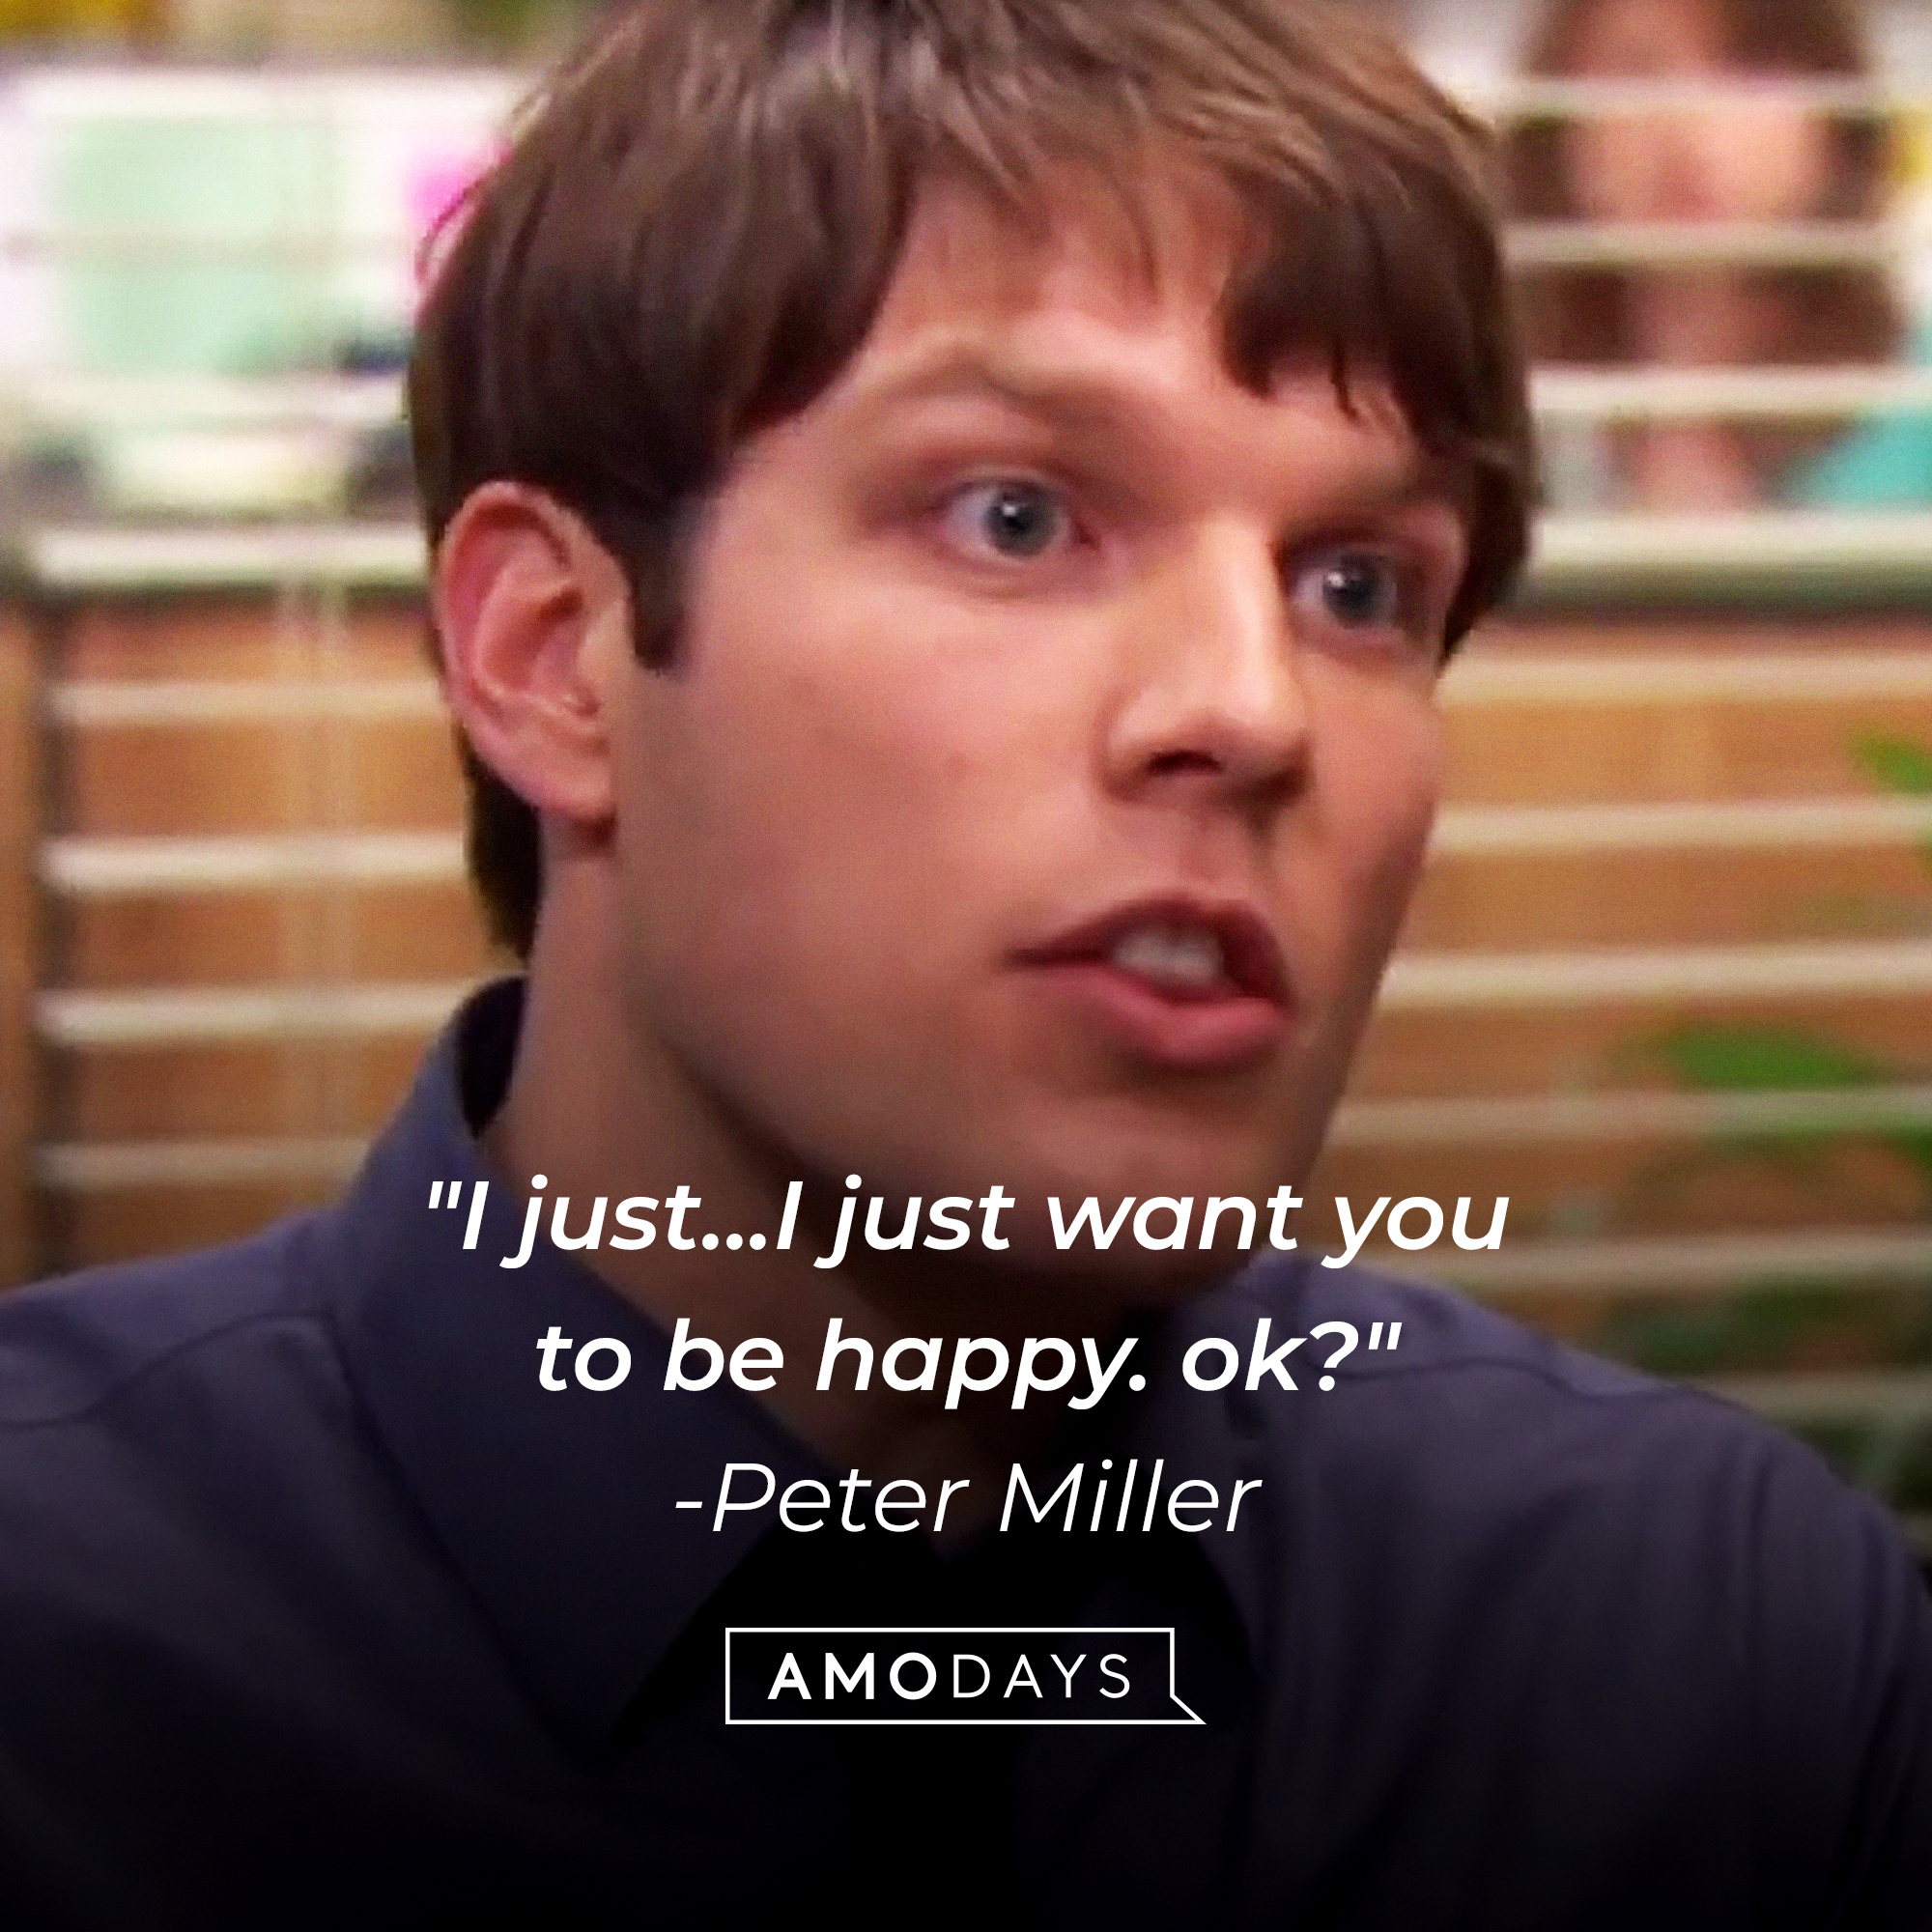 Peter Miller's quote: "I just...I just want you to be happy. ok?" | Source: YouTube/TheOffice